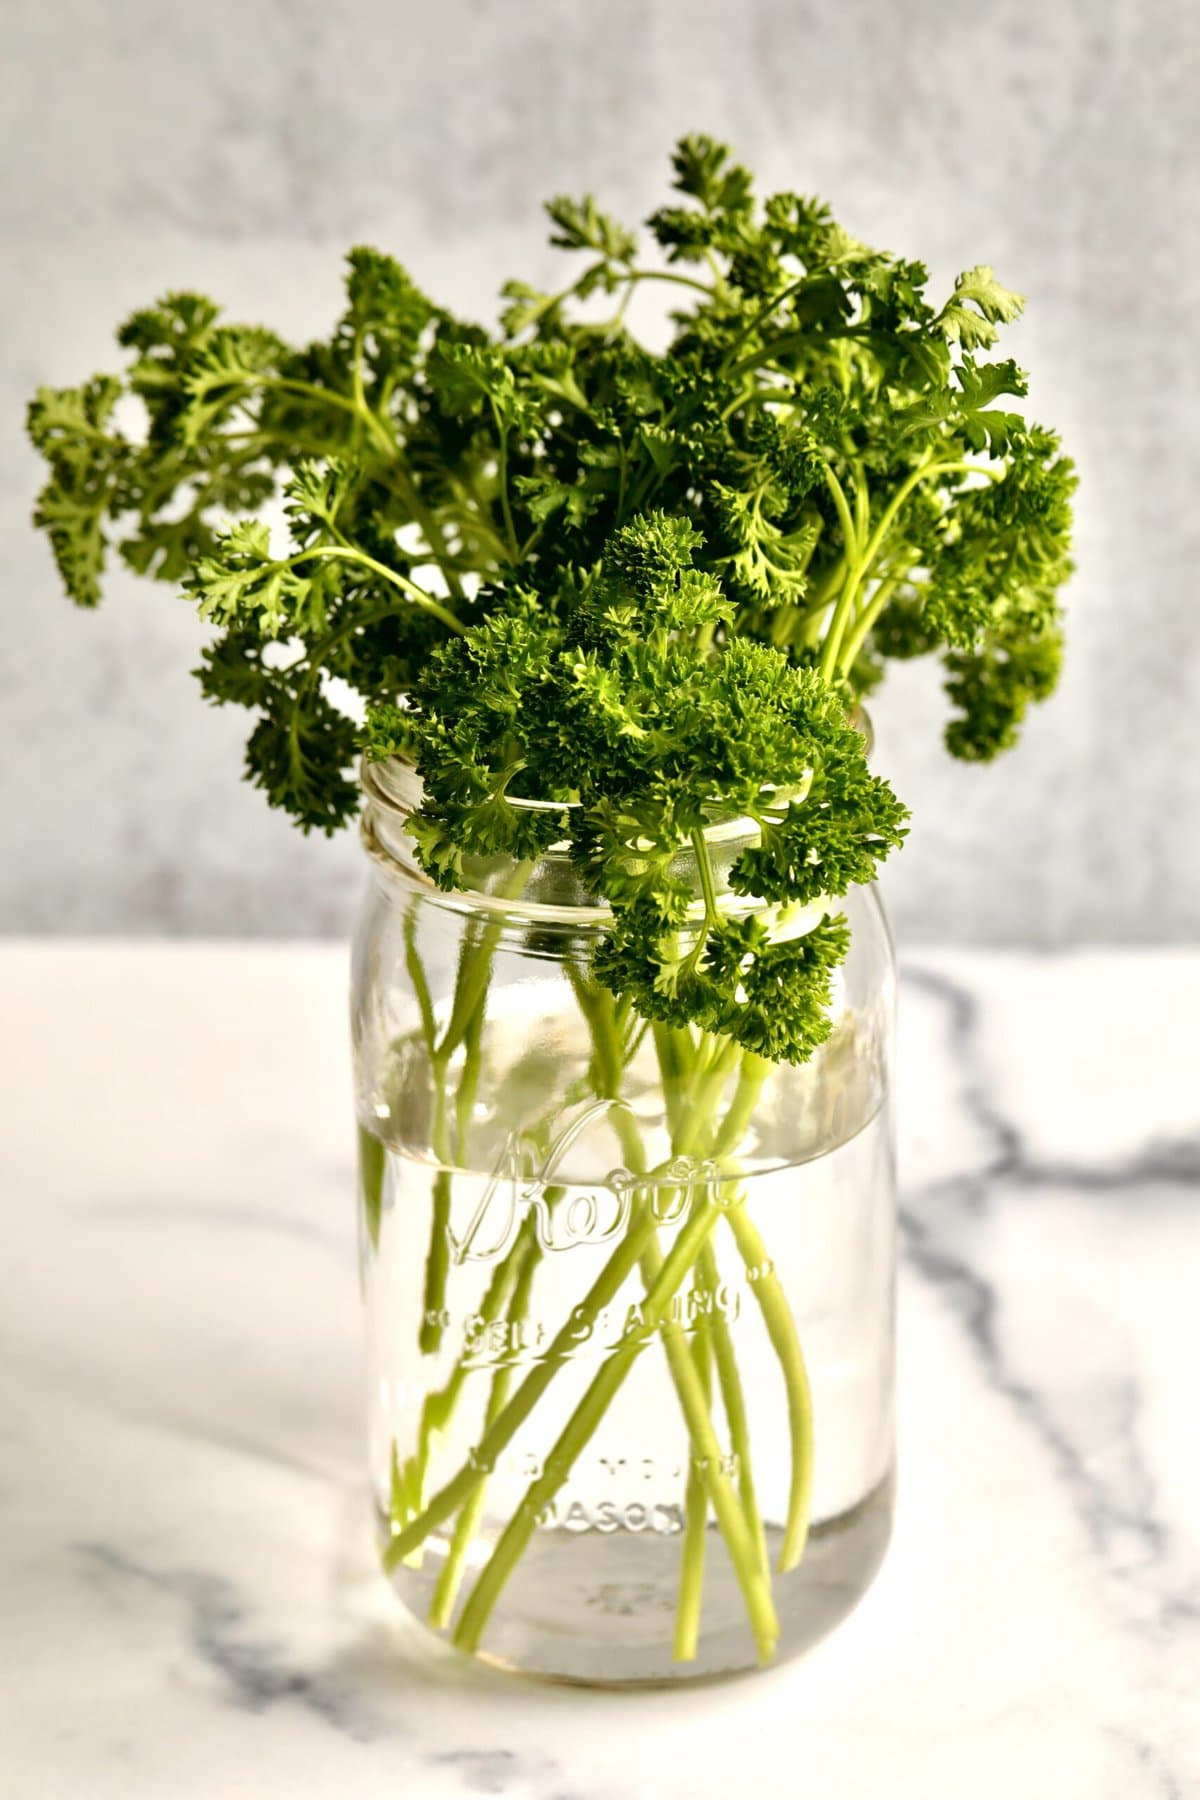 curly parsley in jar with water.